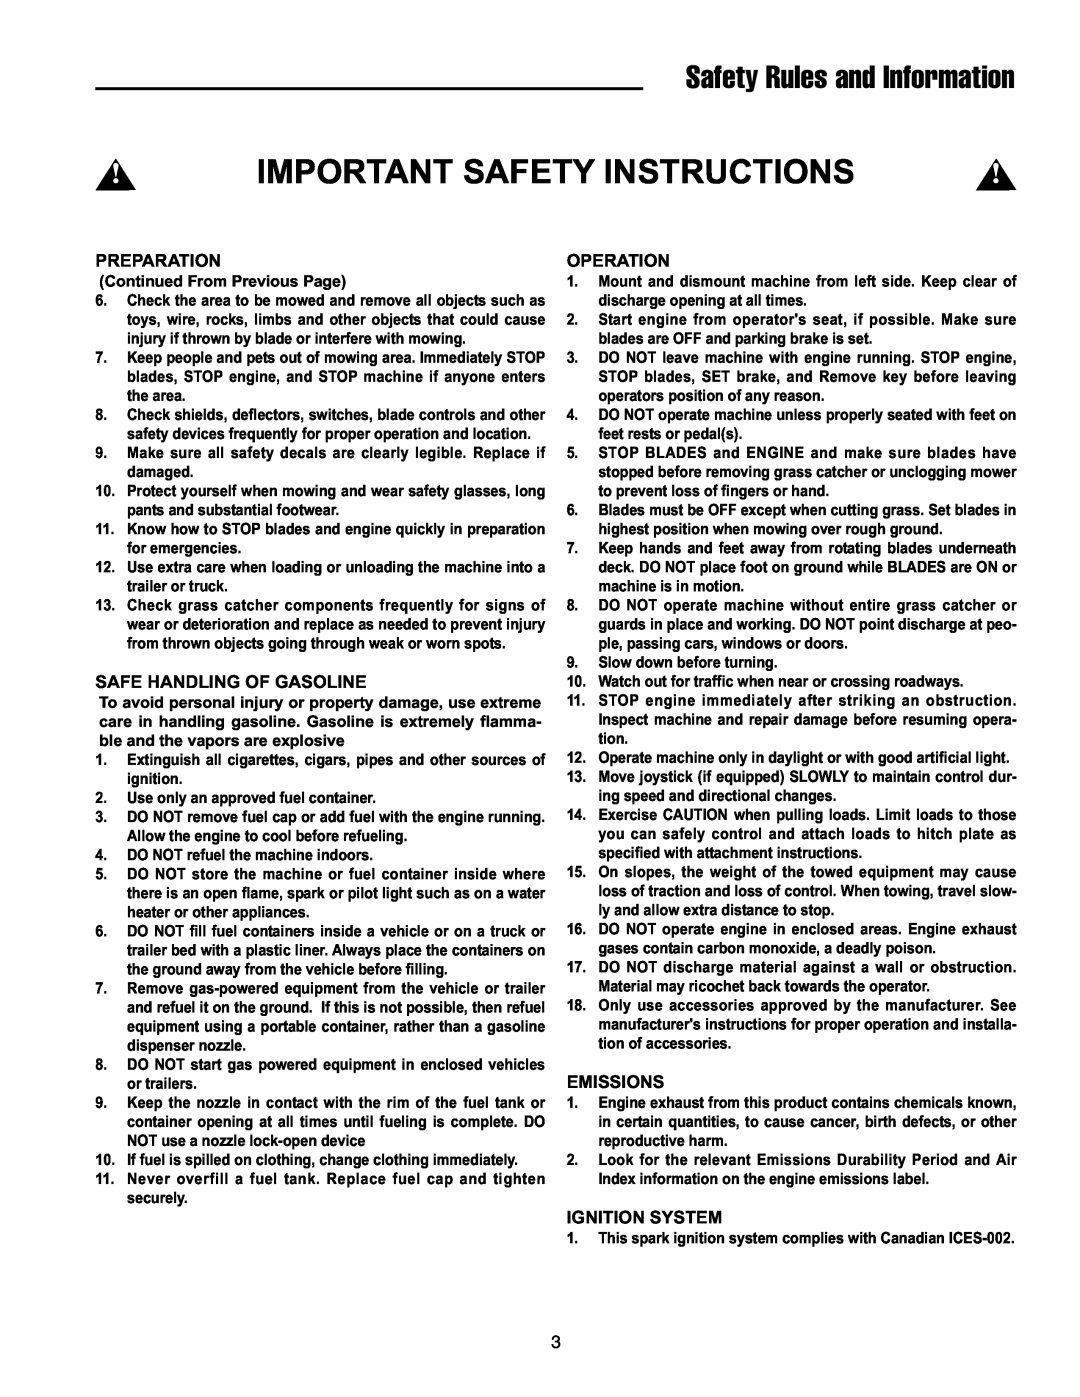 Simplicity 250 Z manual Safety Rules and Information, Important Safety Instructions, Preparation, Safe Handling Of Gasoline 